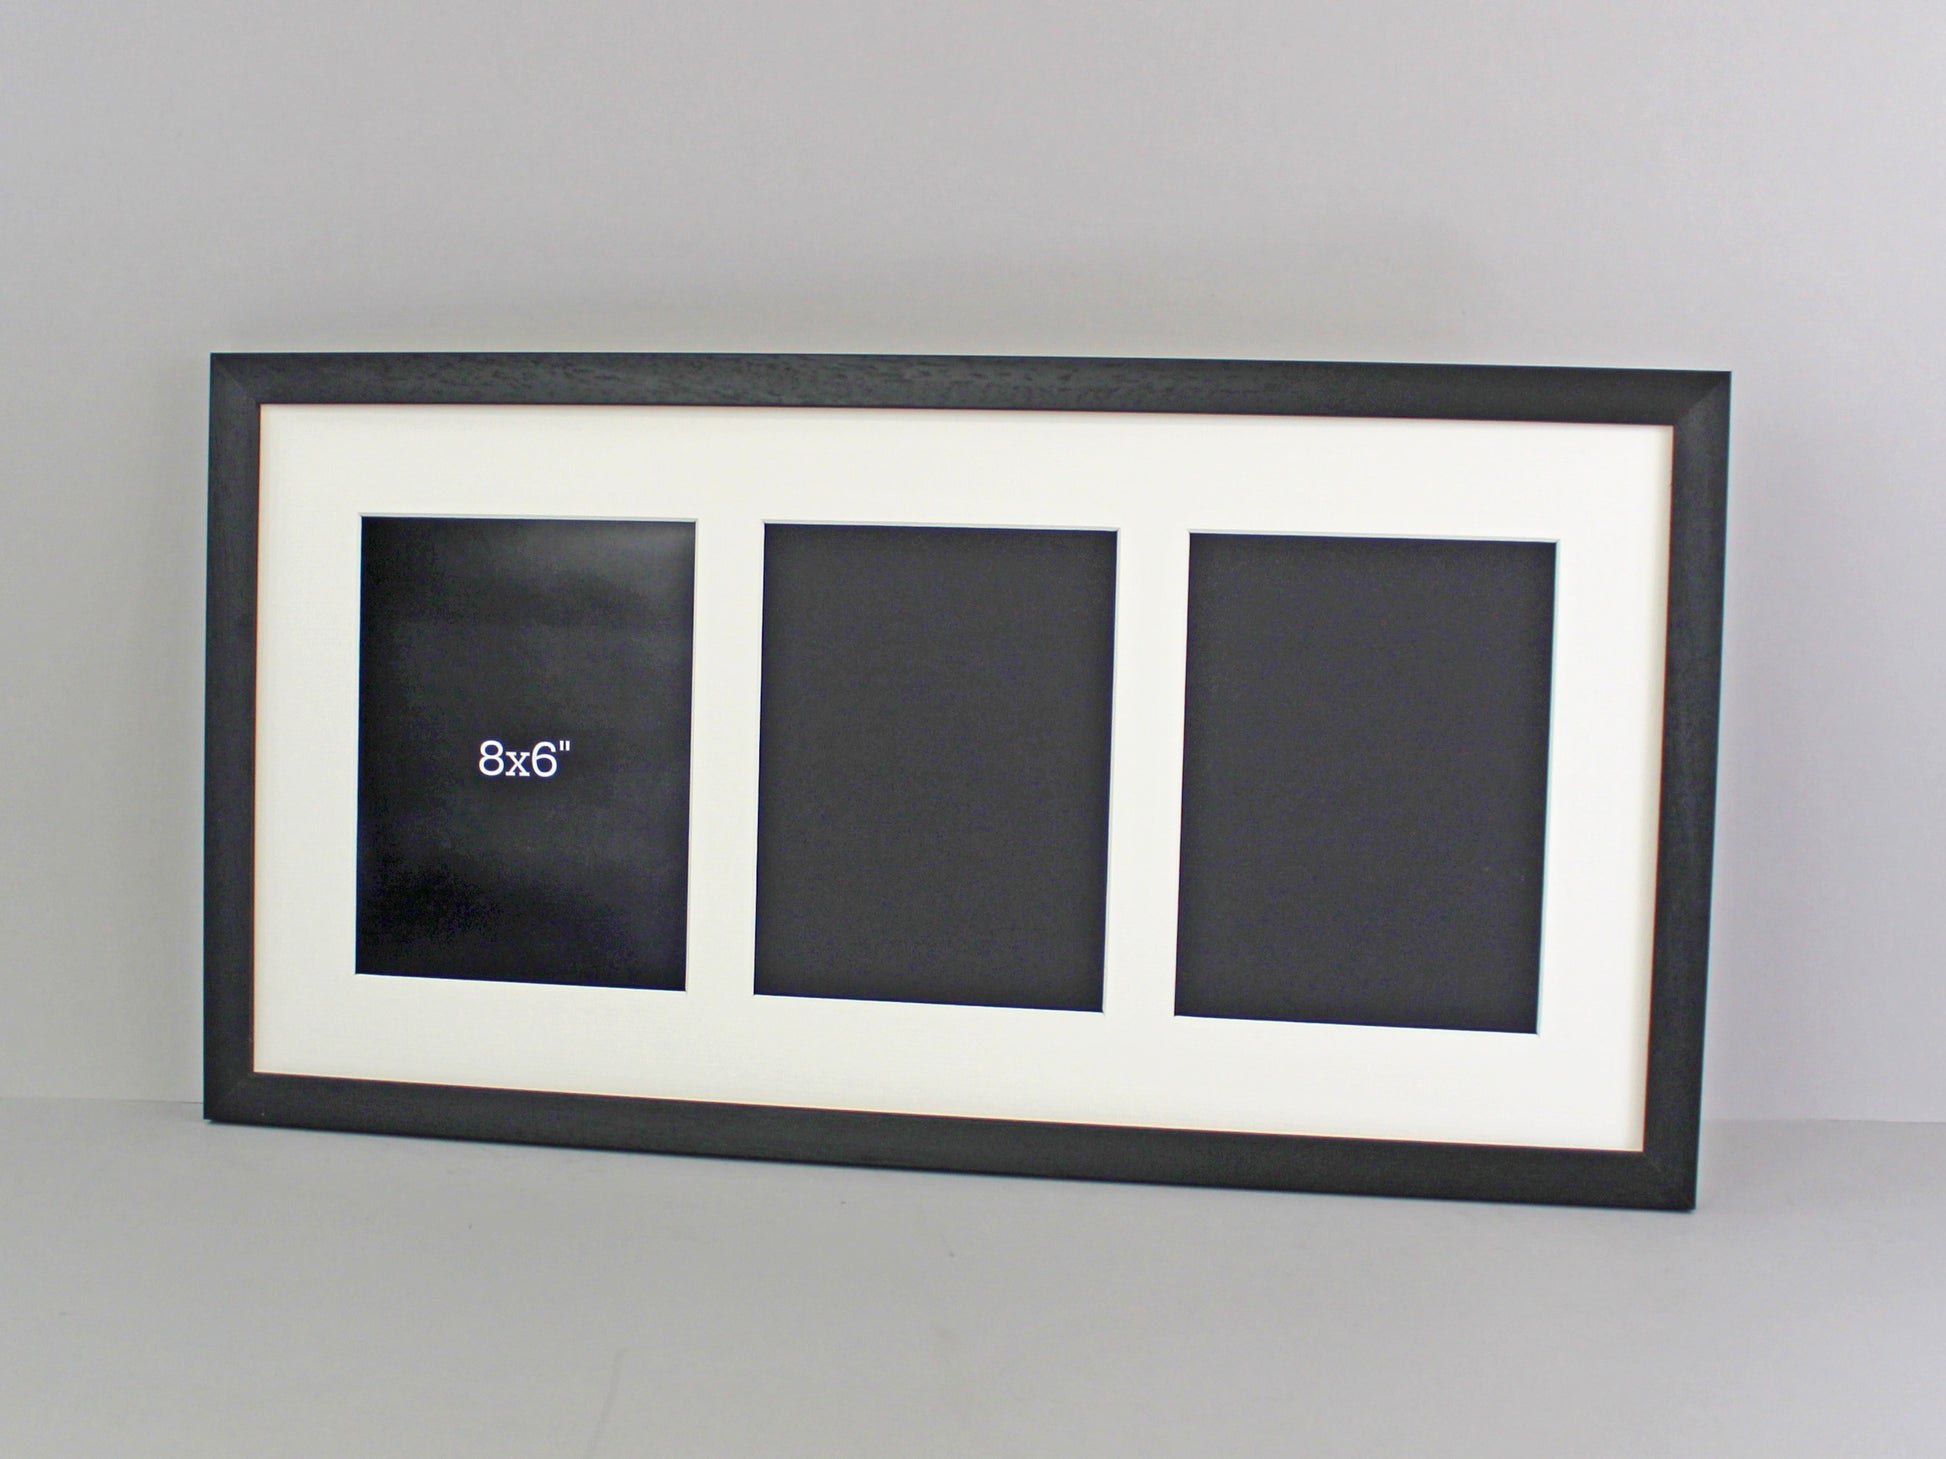 Suits Three 8x6" sized Prints/Photos. 30x60cm. Wooden Multi Aperture Frame. - PhotoFramesandMore - Wooden Picture Frames